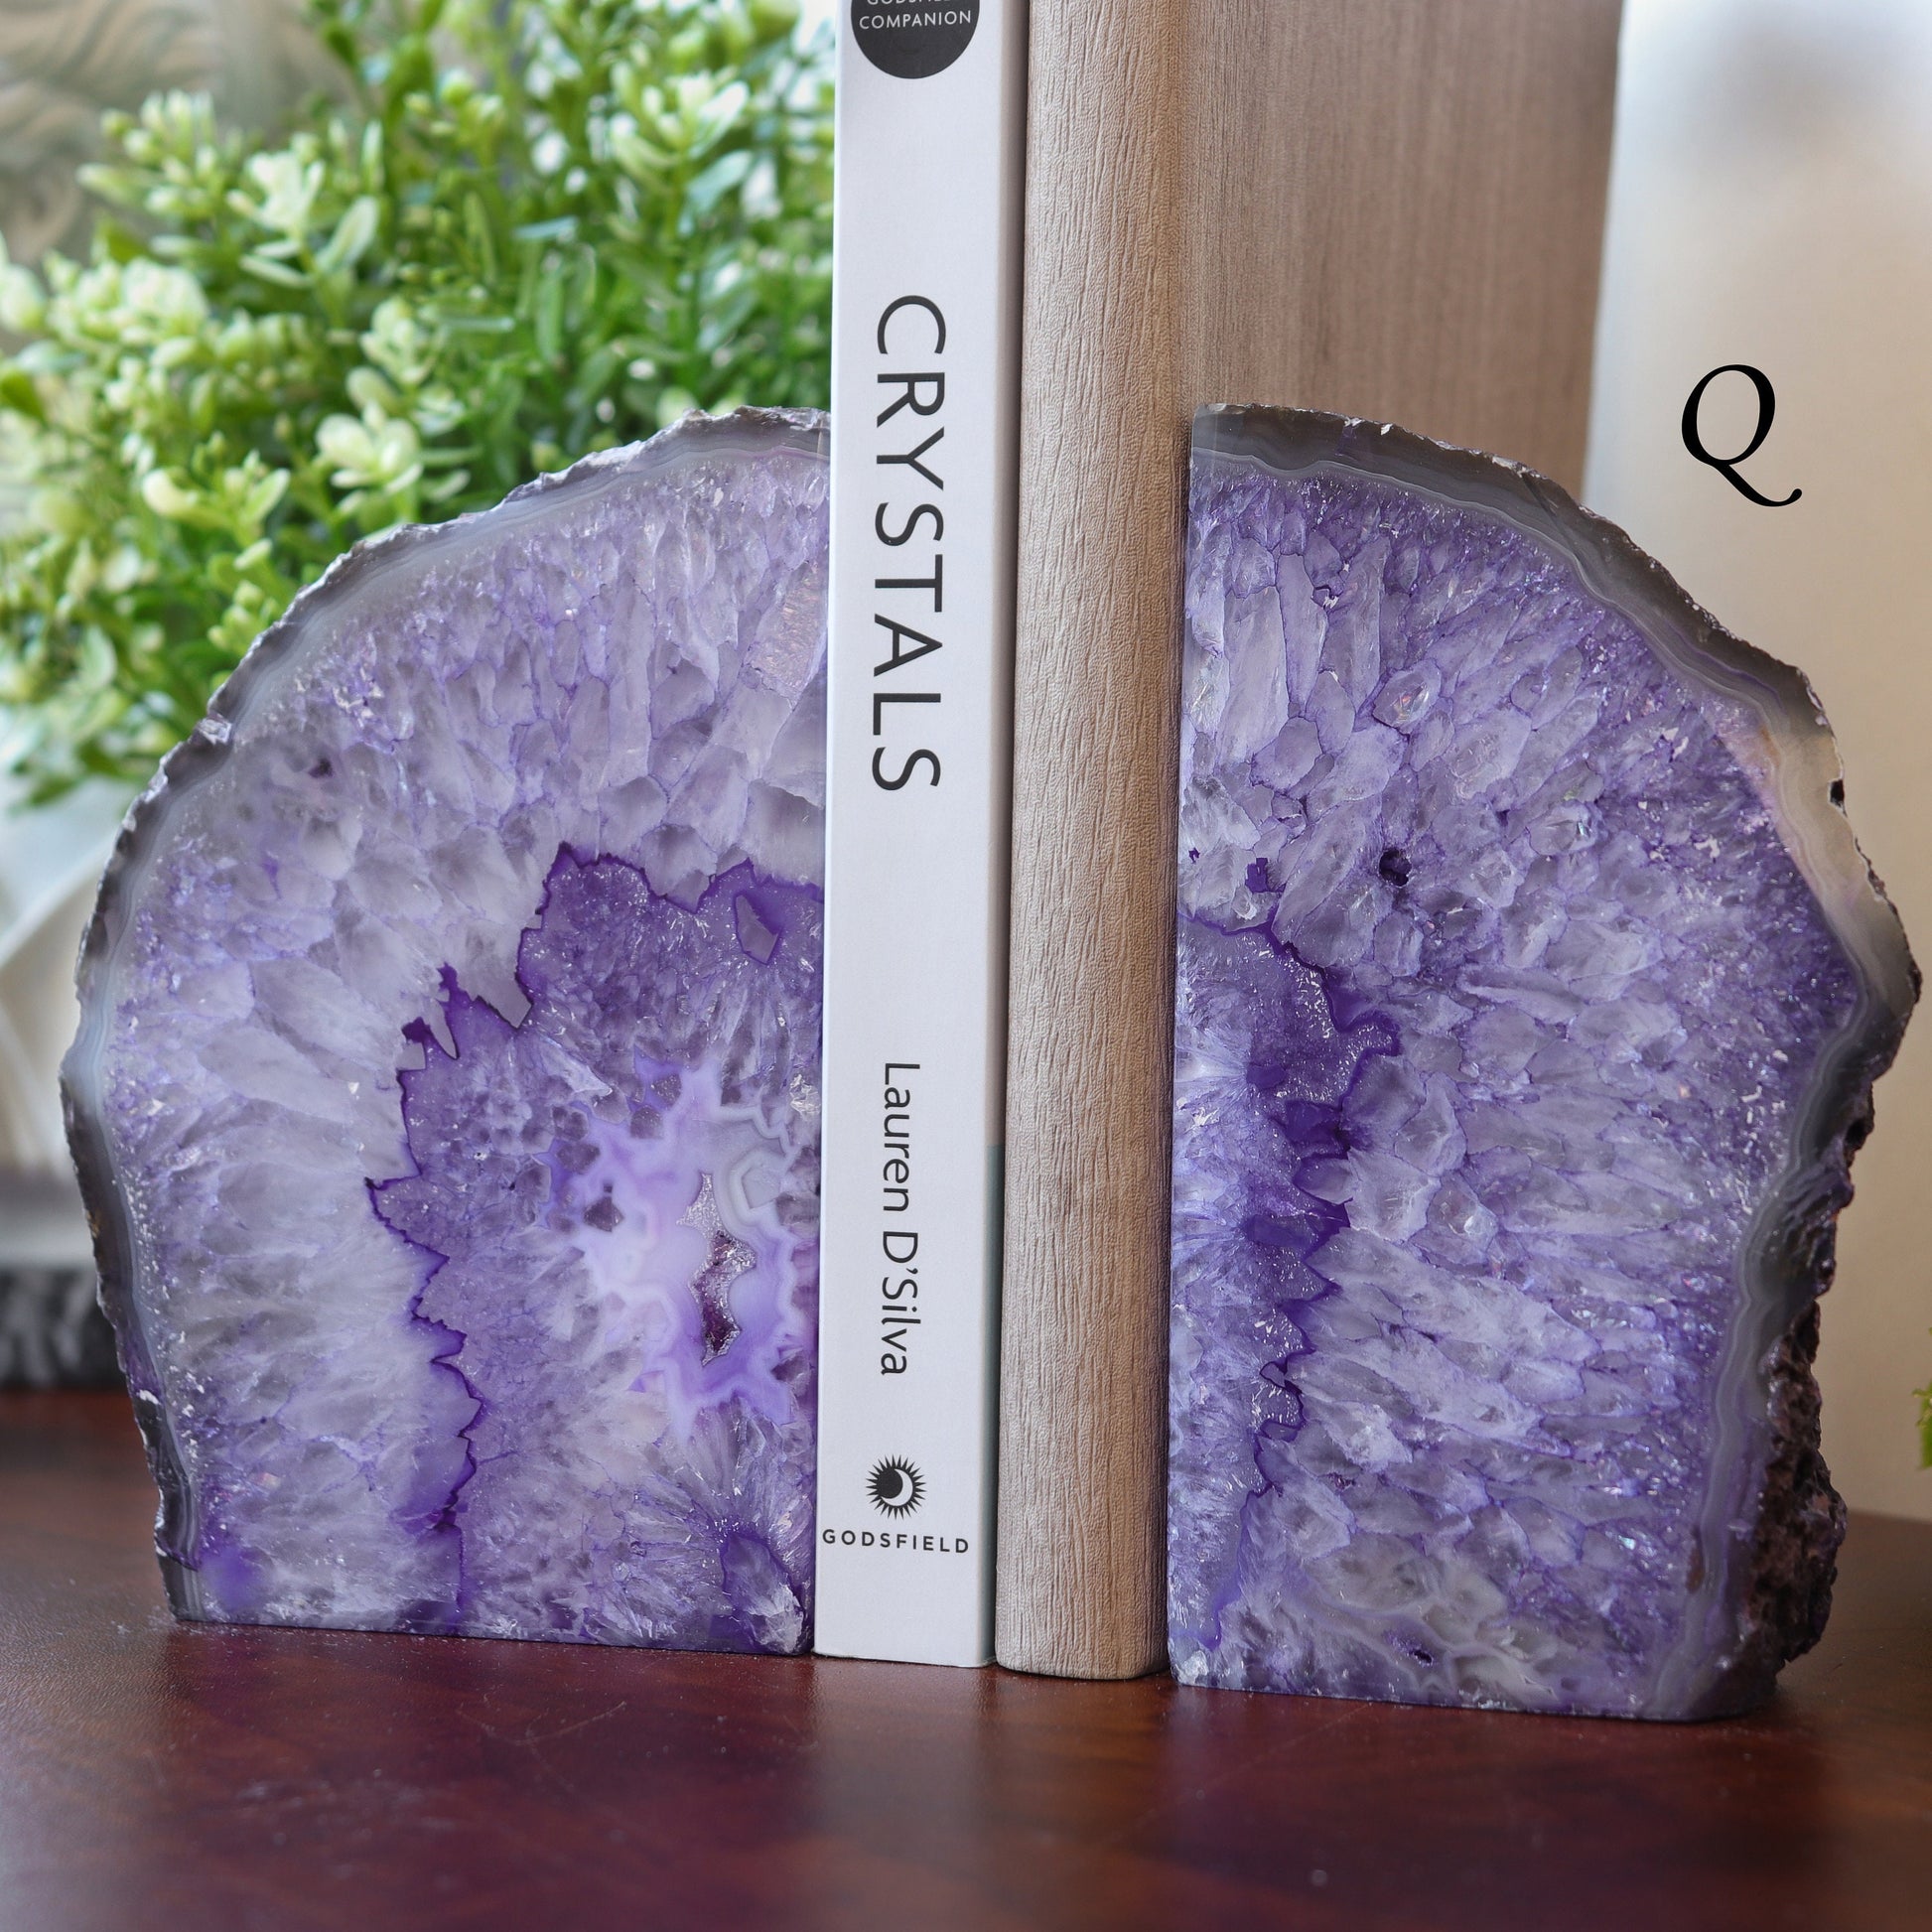 Crystal Agate Bookends, Purple Bookends, Spiritual Home Decor, Ethically Sourced - PICK YOUR OWN